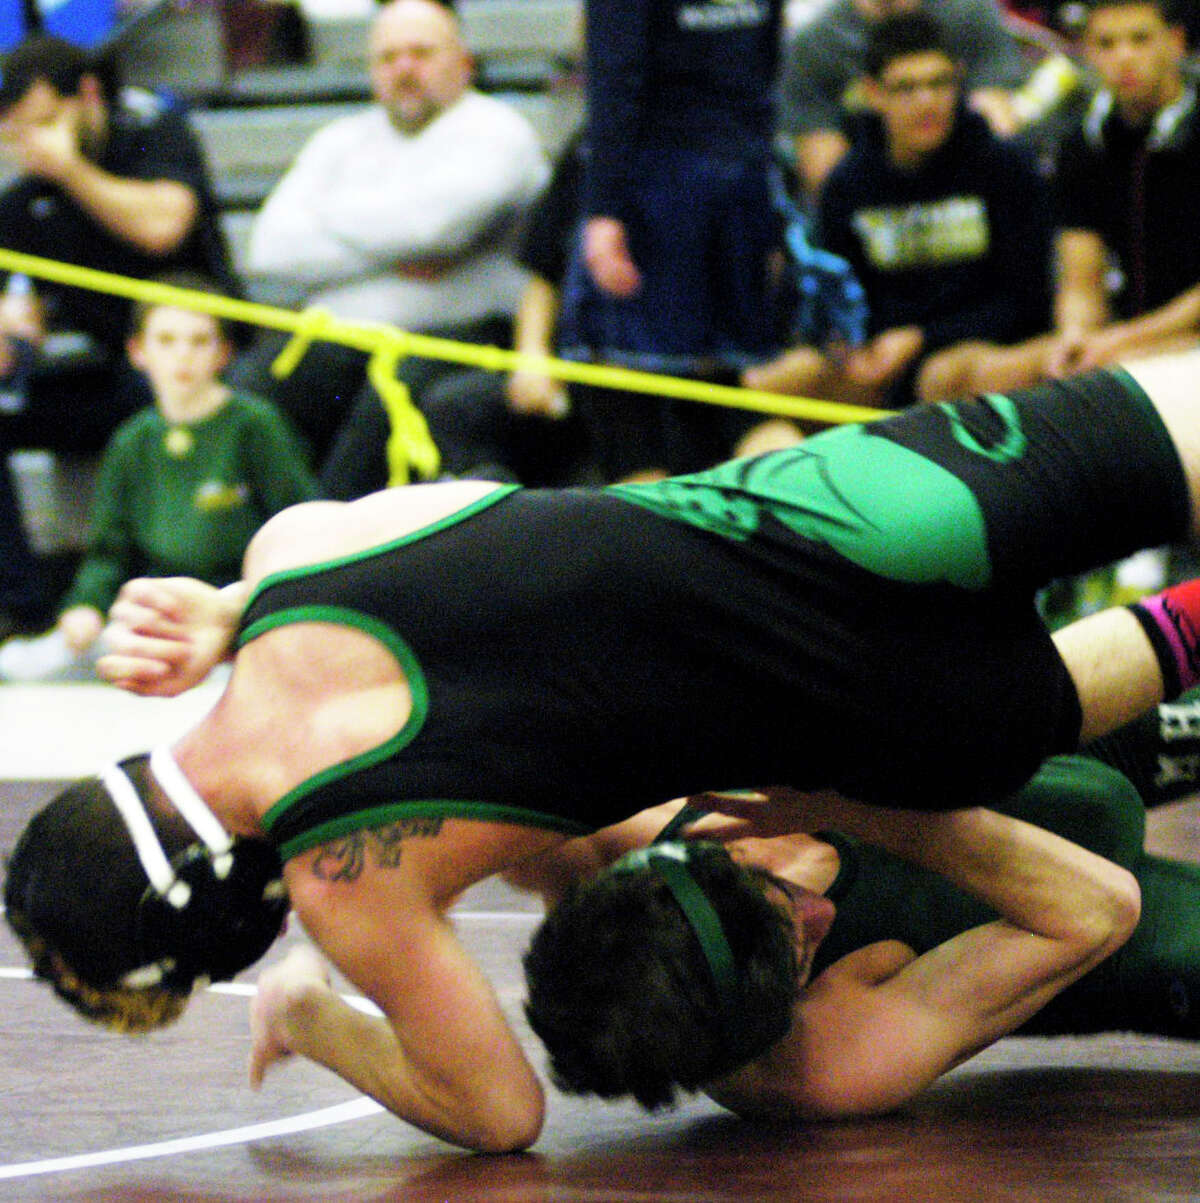 Green Wave senior Halim Bourjeli, top, duels Ryan Pantalena of Maloney in the 106-pound semifinals for New Milford High School wrestling in the state class 'L' tournament at Bristol Central High School, Feb. 22, 2014.